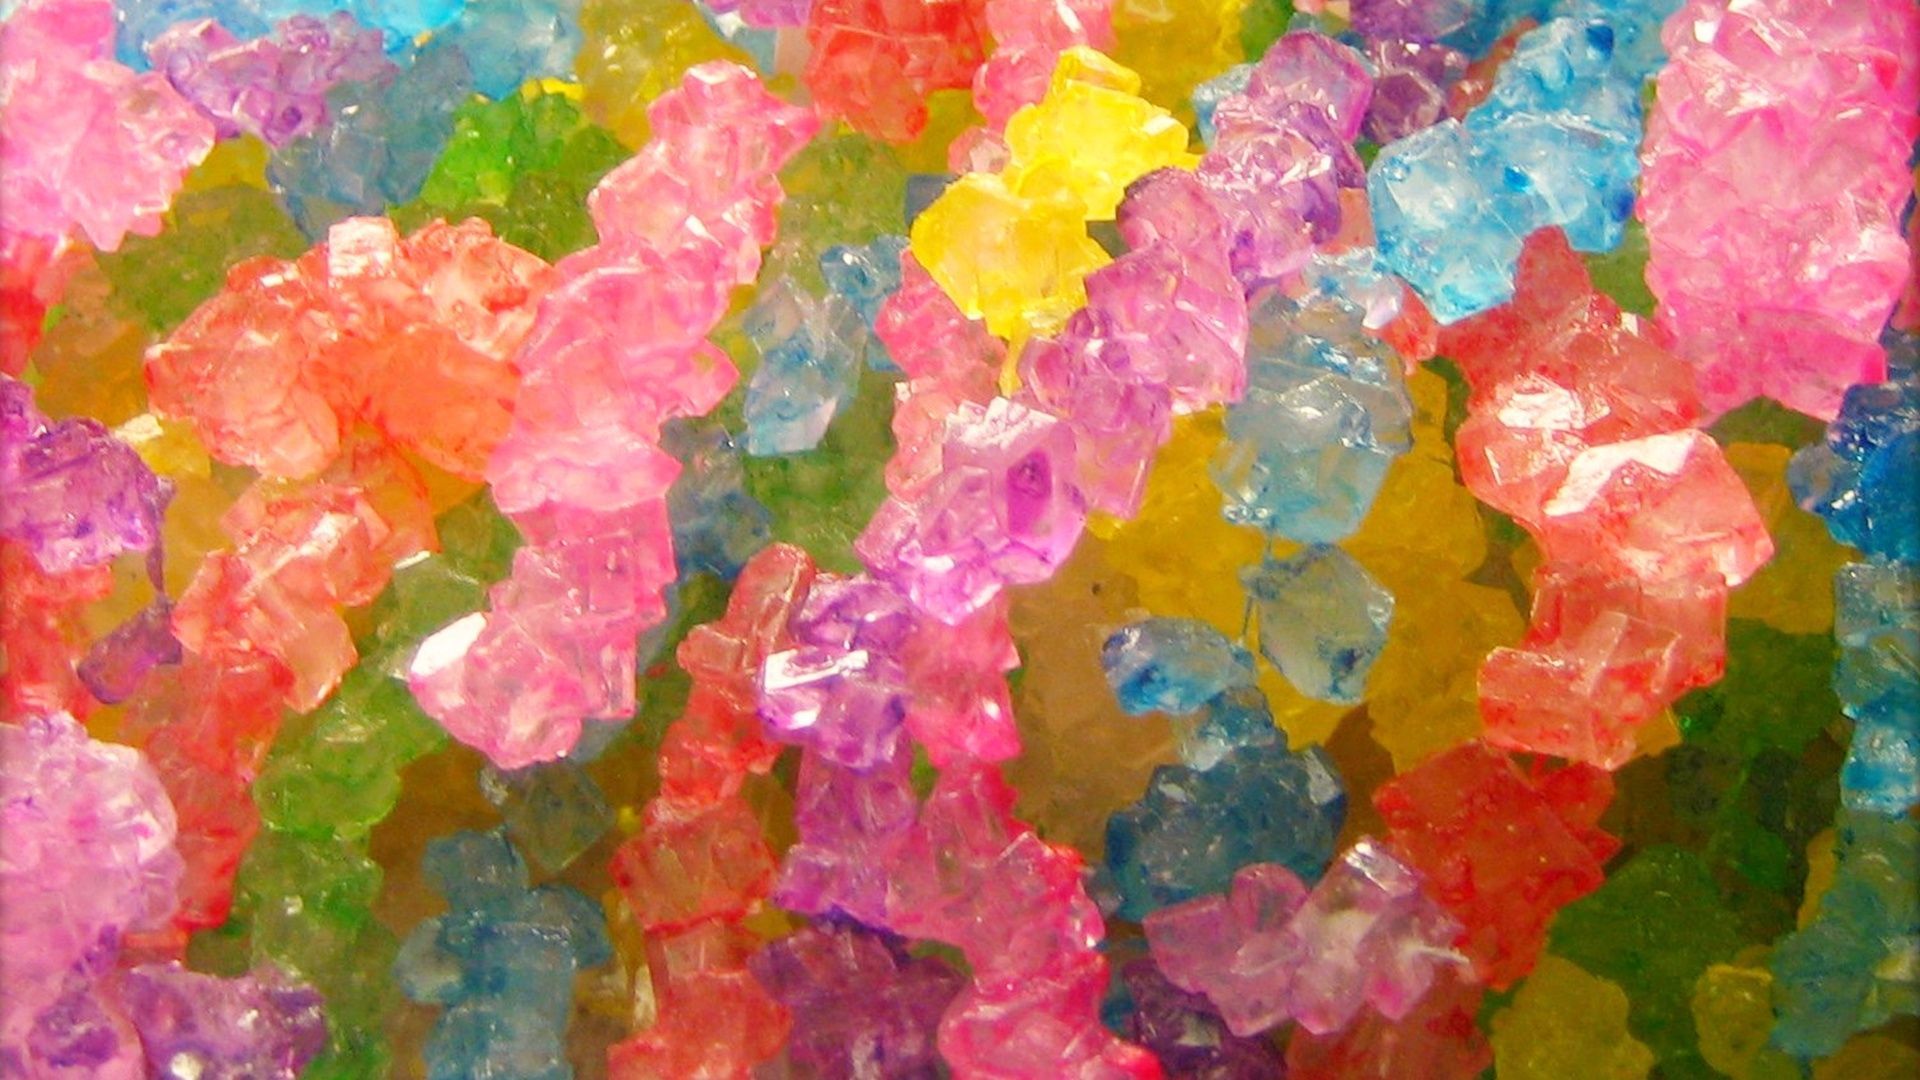 Colorful candy rocks - Candy